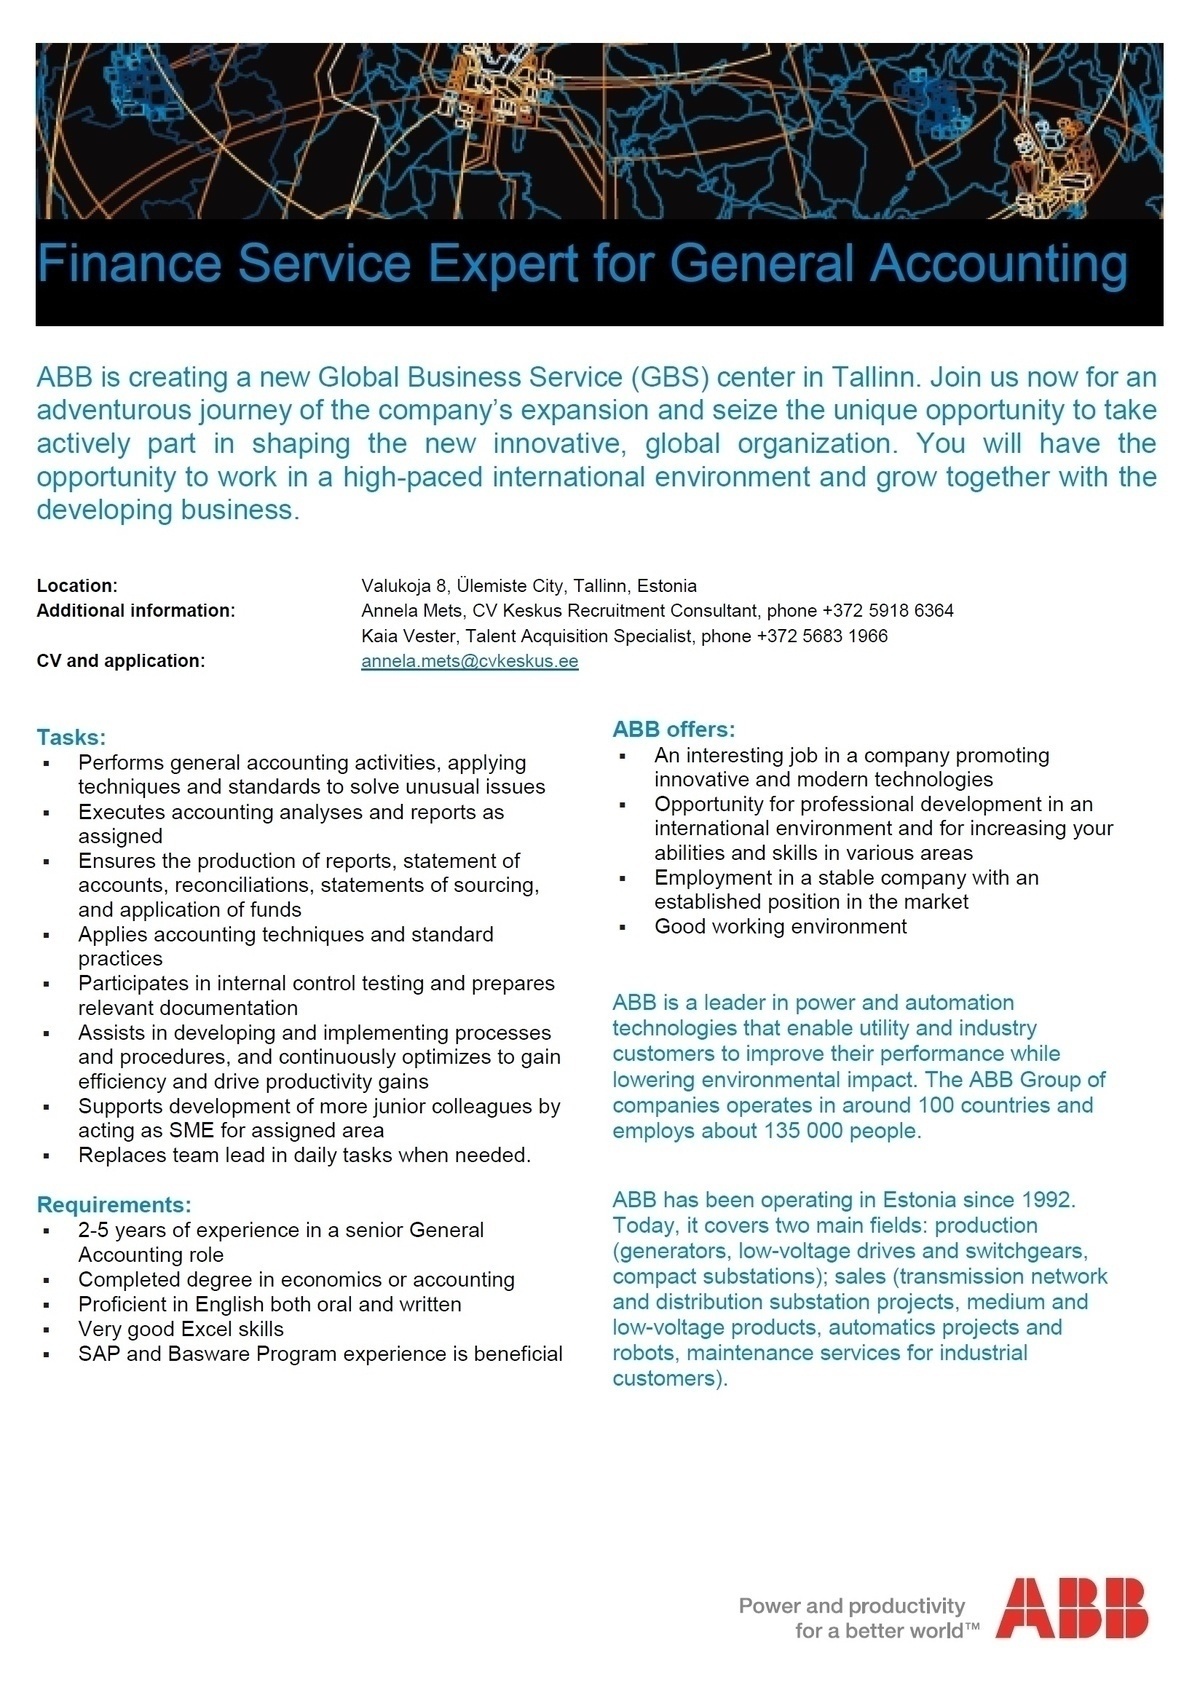 CV KESKUS OÜ ABB is looking for a Finance Service Expert for General Accounting